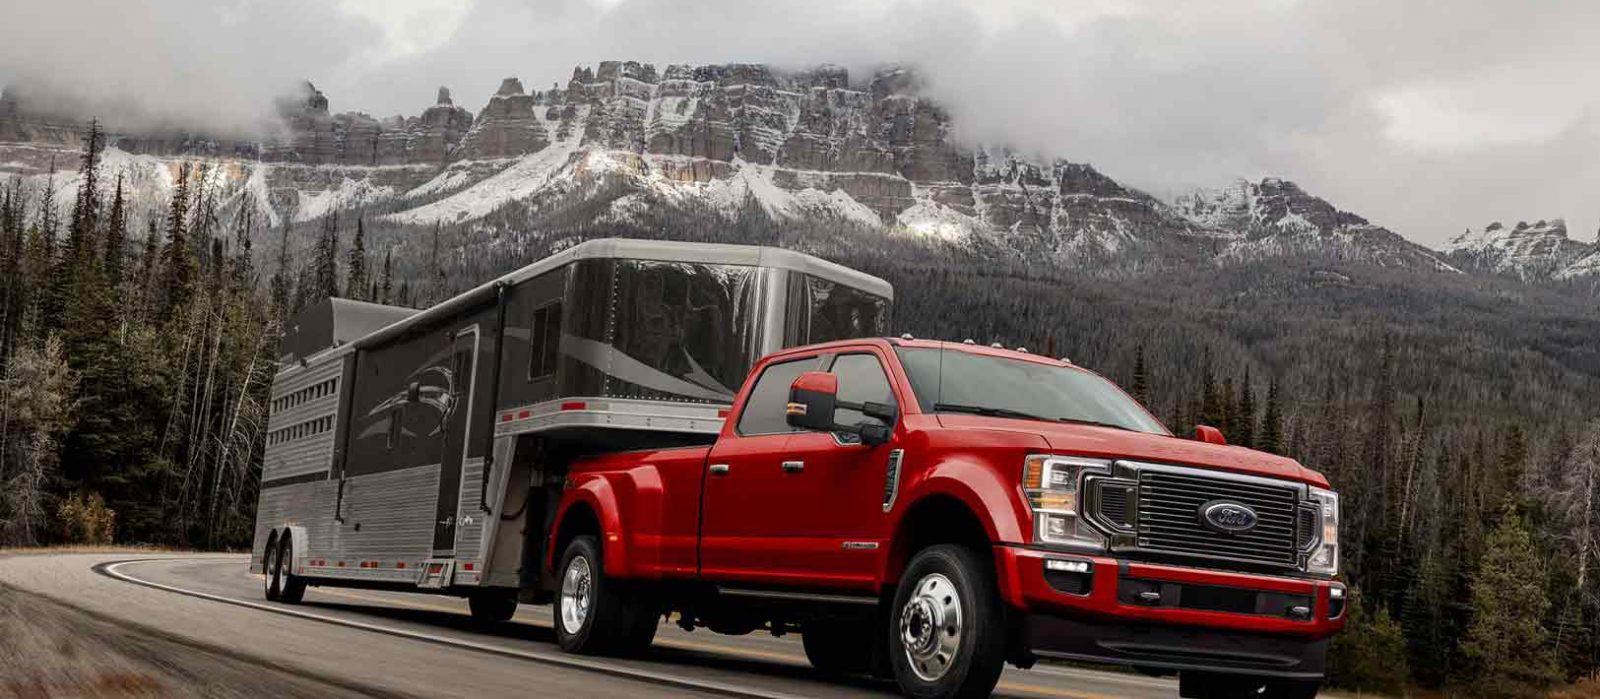 best truck for towing 5th wheel